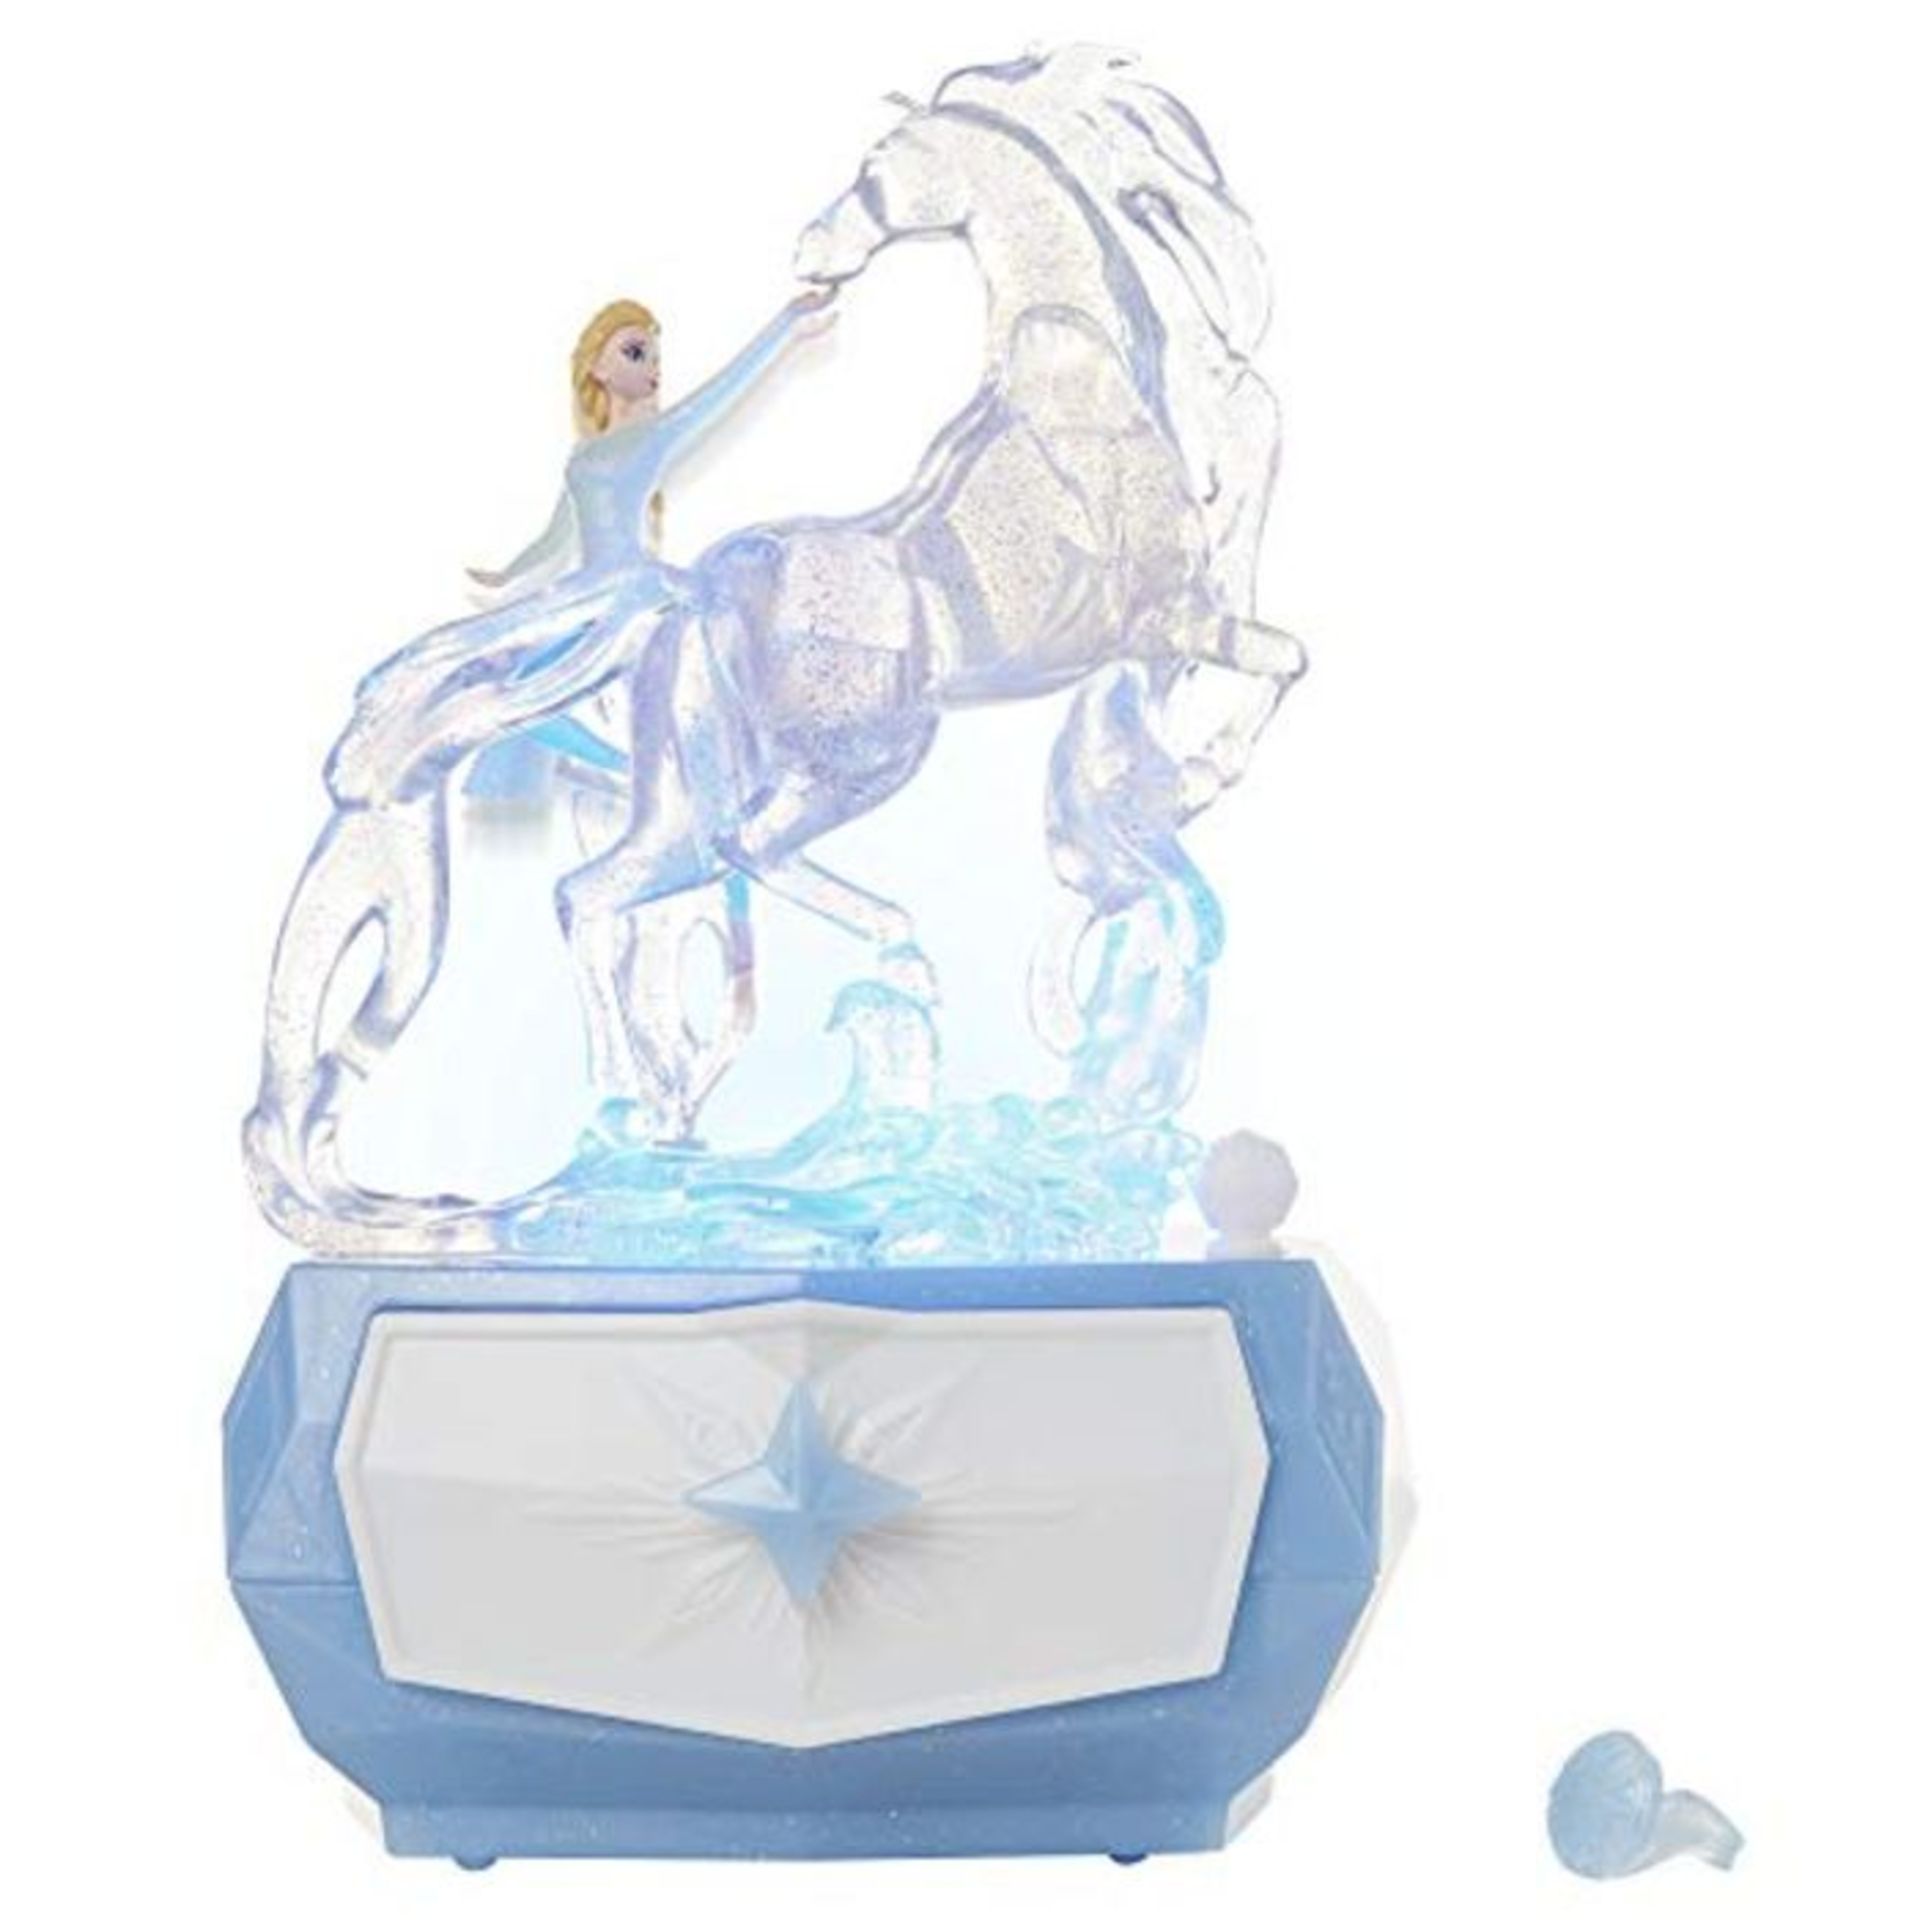 Disney Frozen 2 Elsa & Water Nokk Jewelry Box with Snowflake Ring, Color Changing Ligh